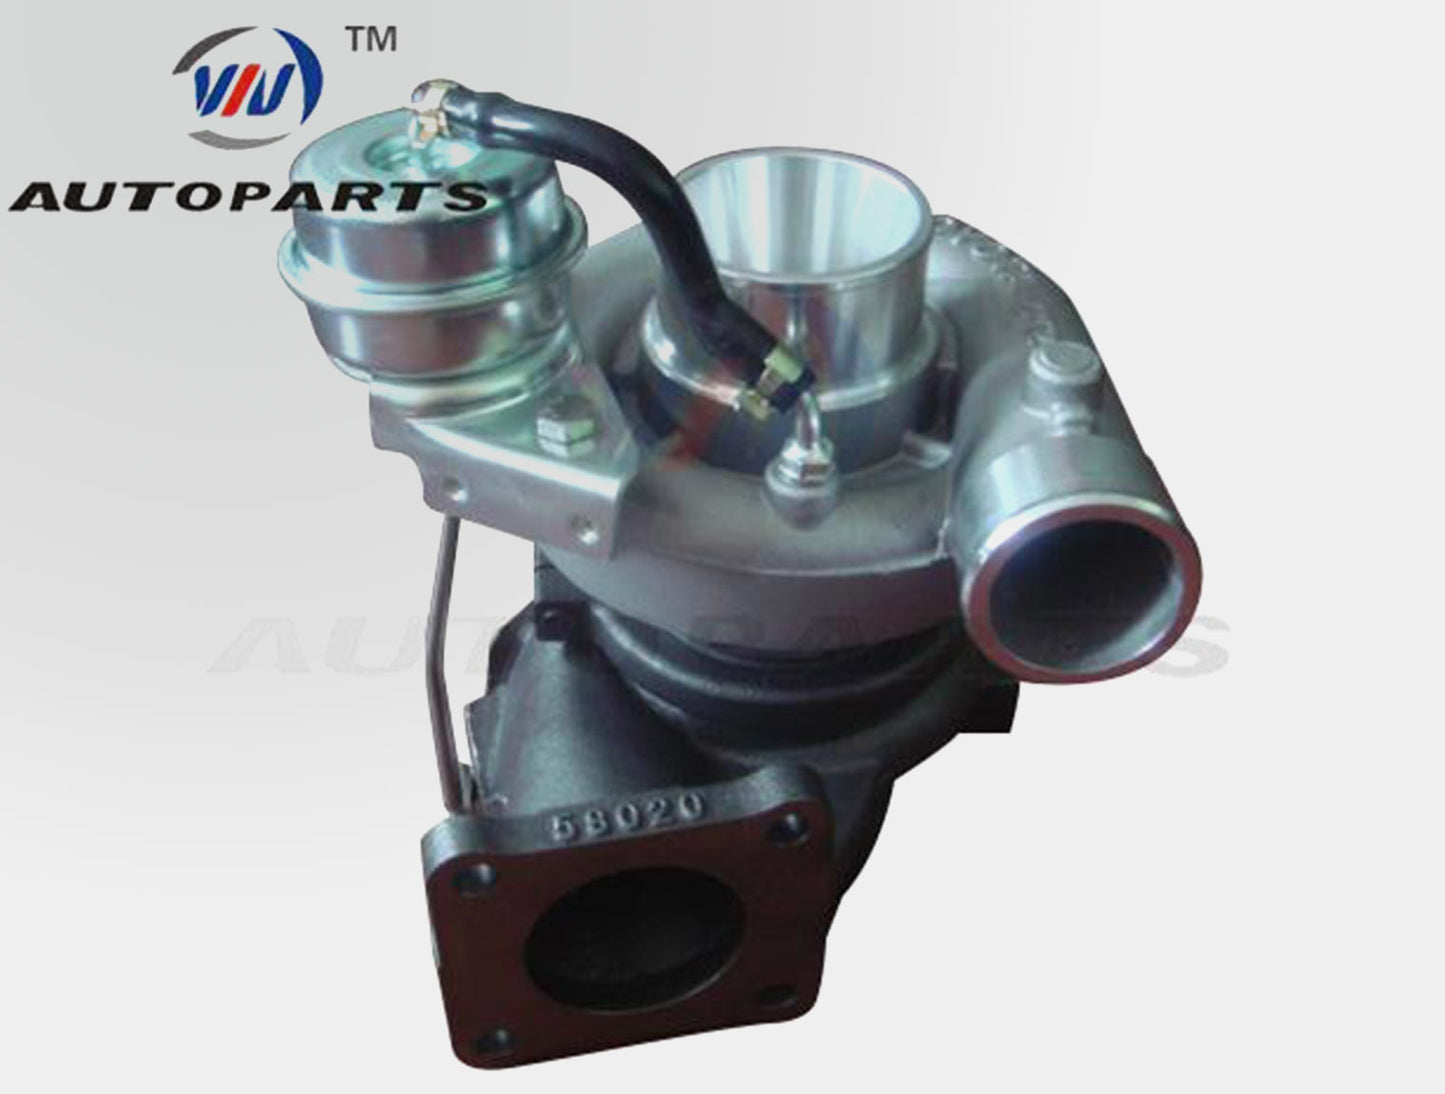 Turbocharger 17201-17020 for Toyota Celica 185£¬Land Cruiser with 1HDFT 4.2L Diesel Engine